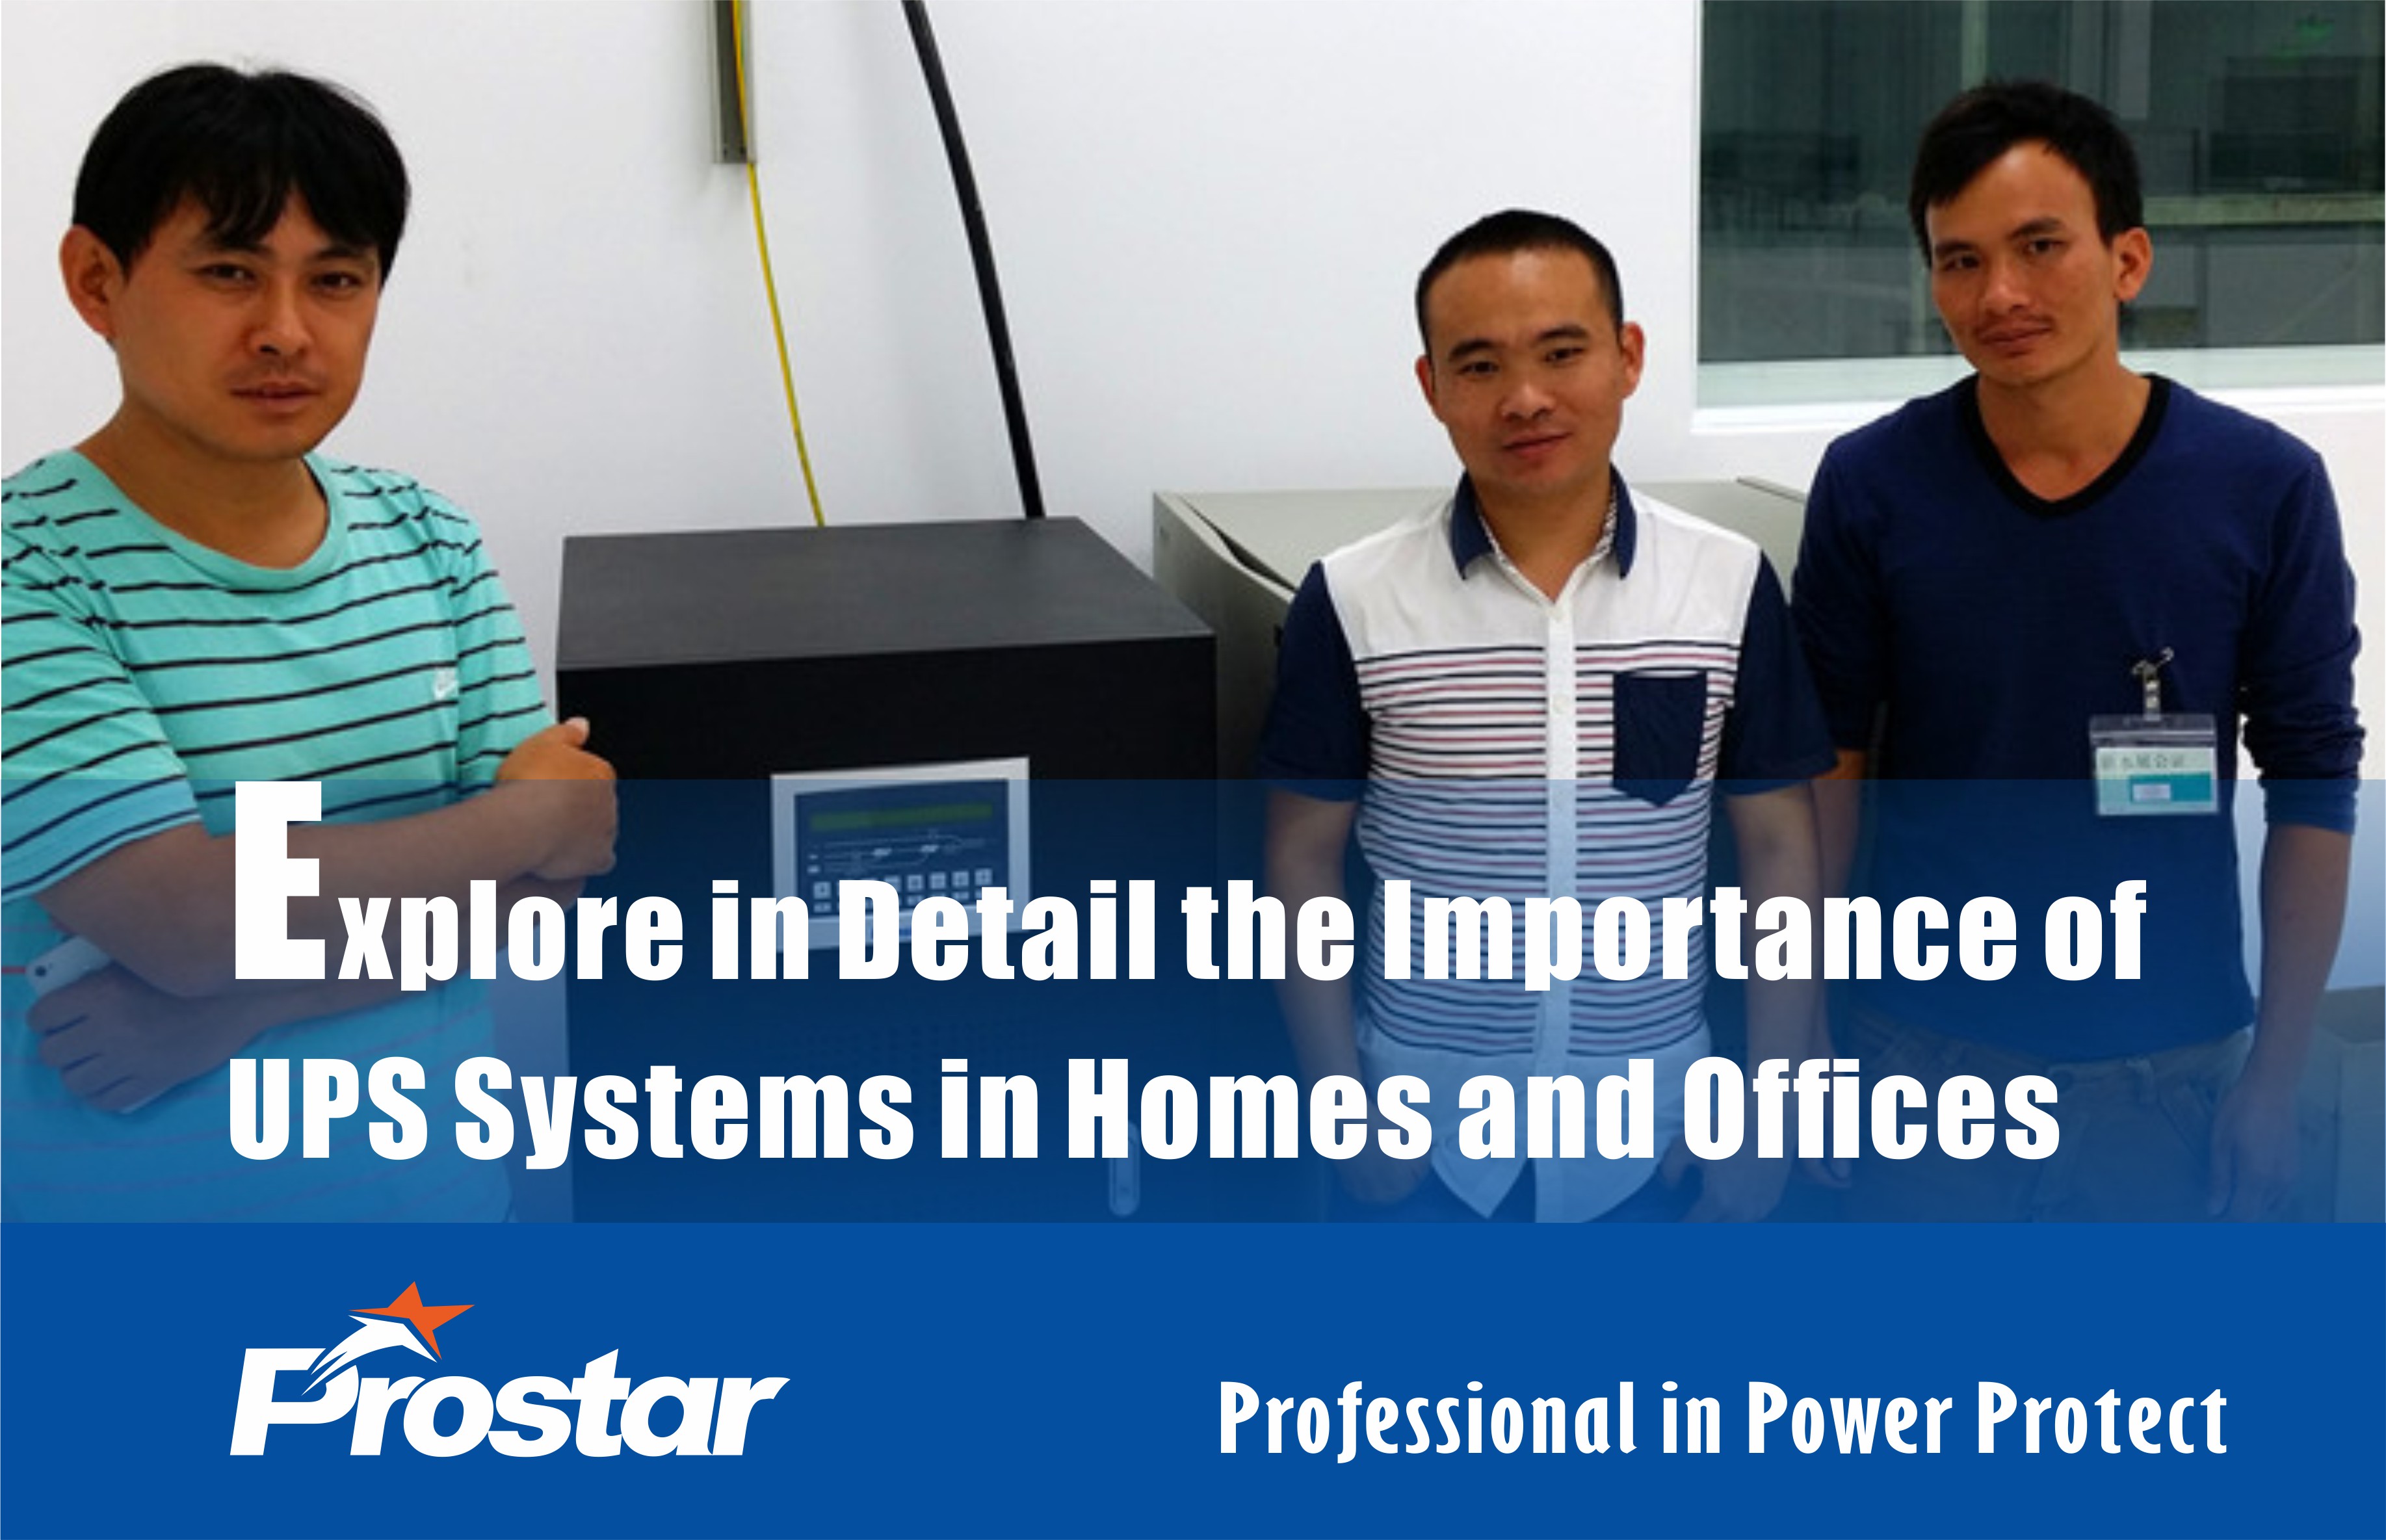 Explore in Detail the Importance of UPS Systems in Homes and Offices